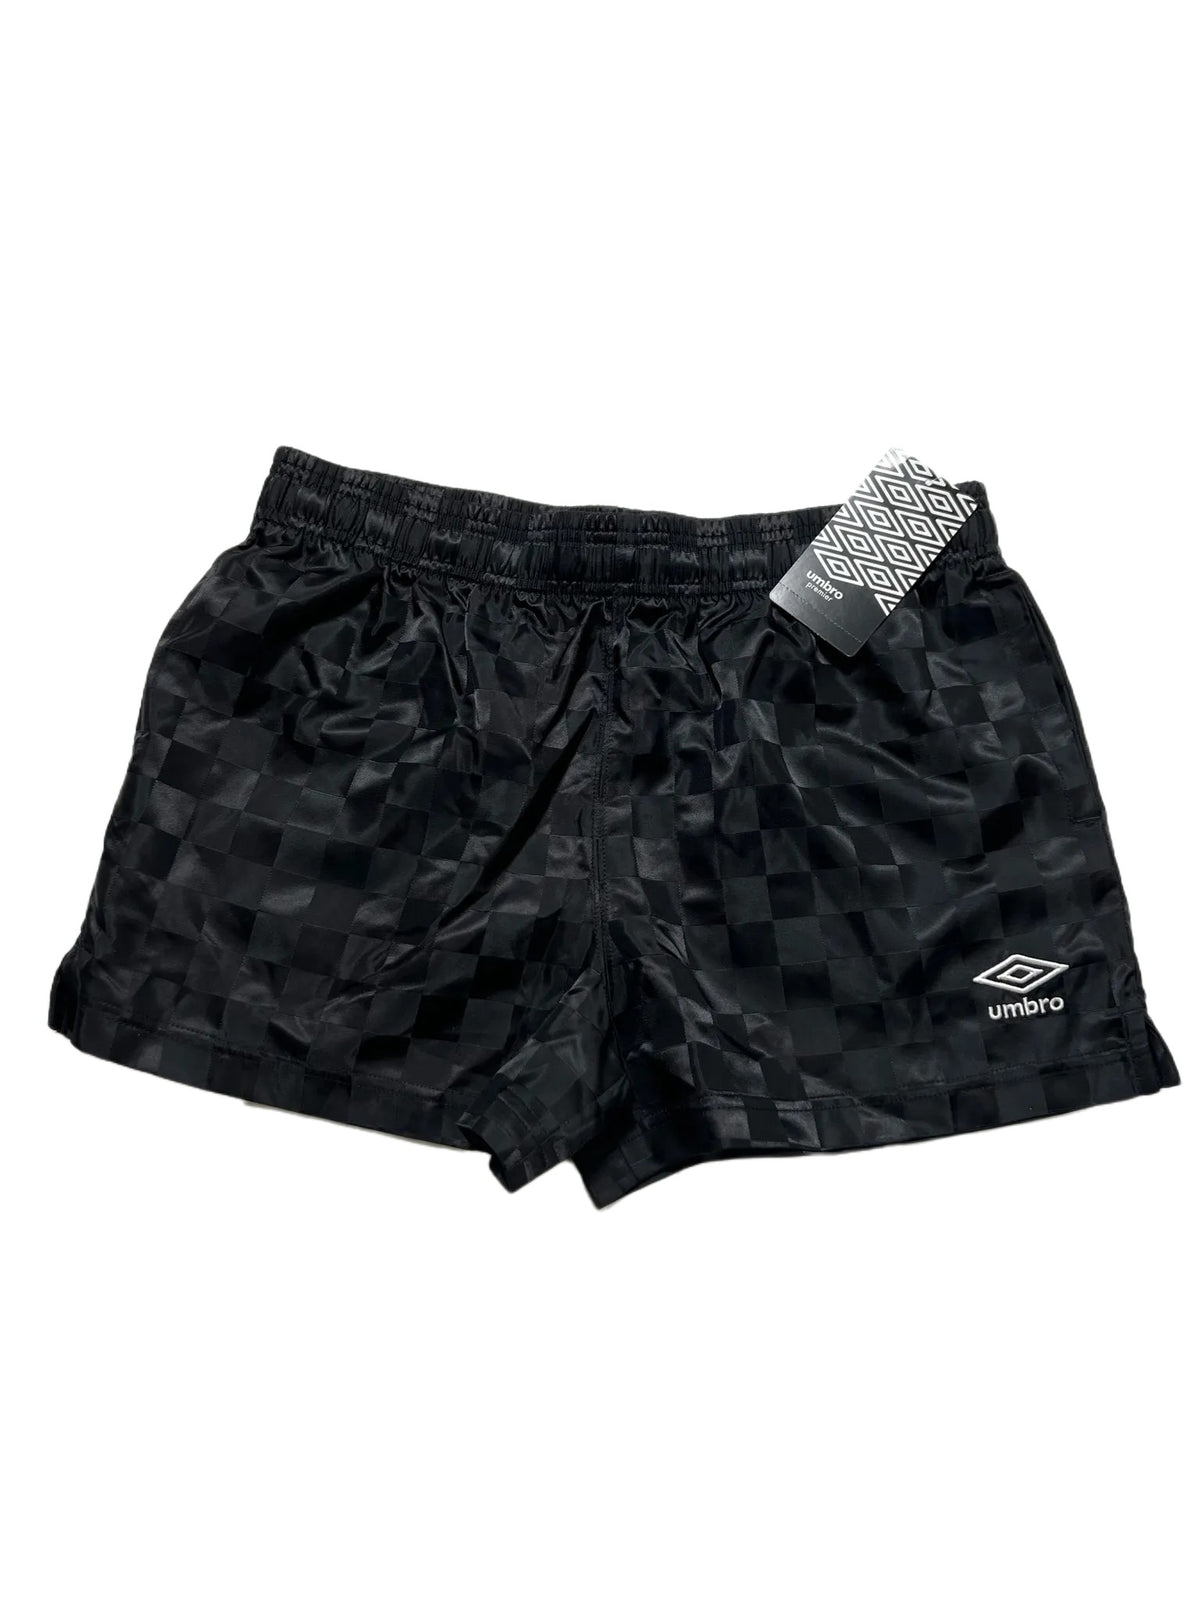 Umbro- Black Soccer Shorts New With Tags!